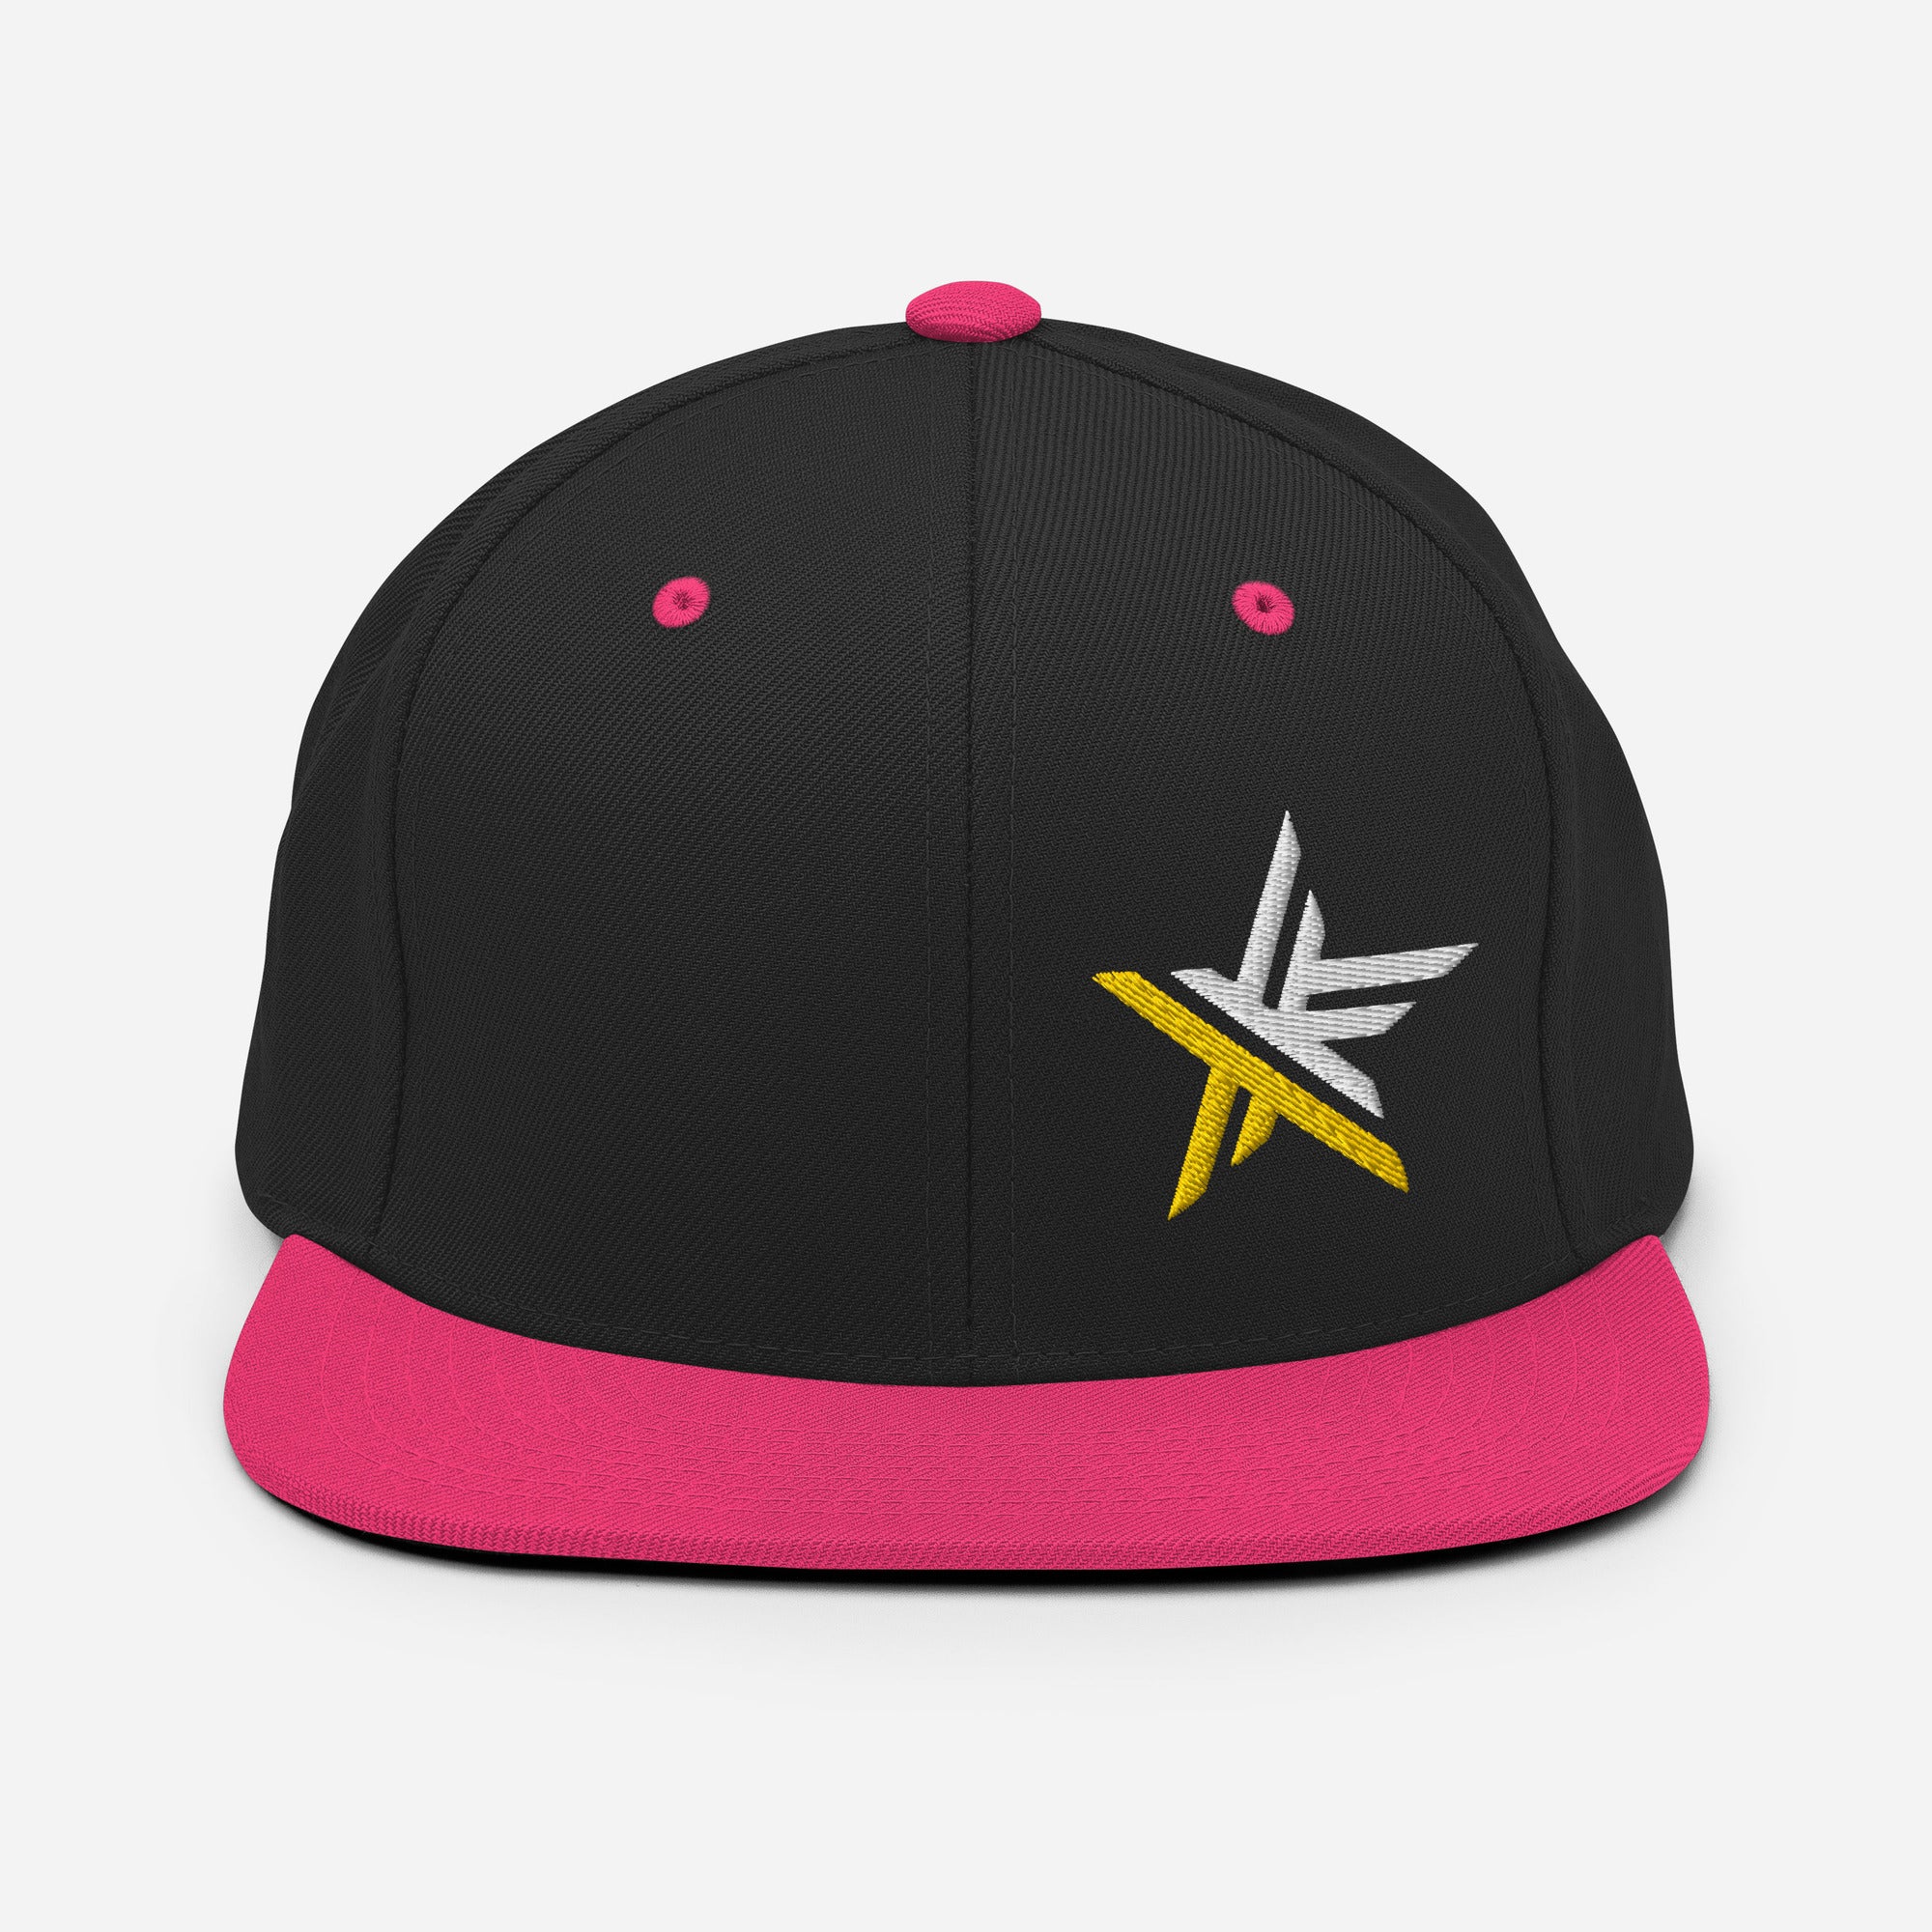 U.S. Army Esports | On Demand | 3D Puff Embroidered Snapback Hat [White Offset Logo]